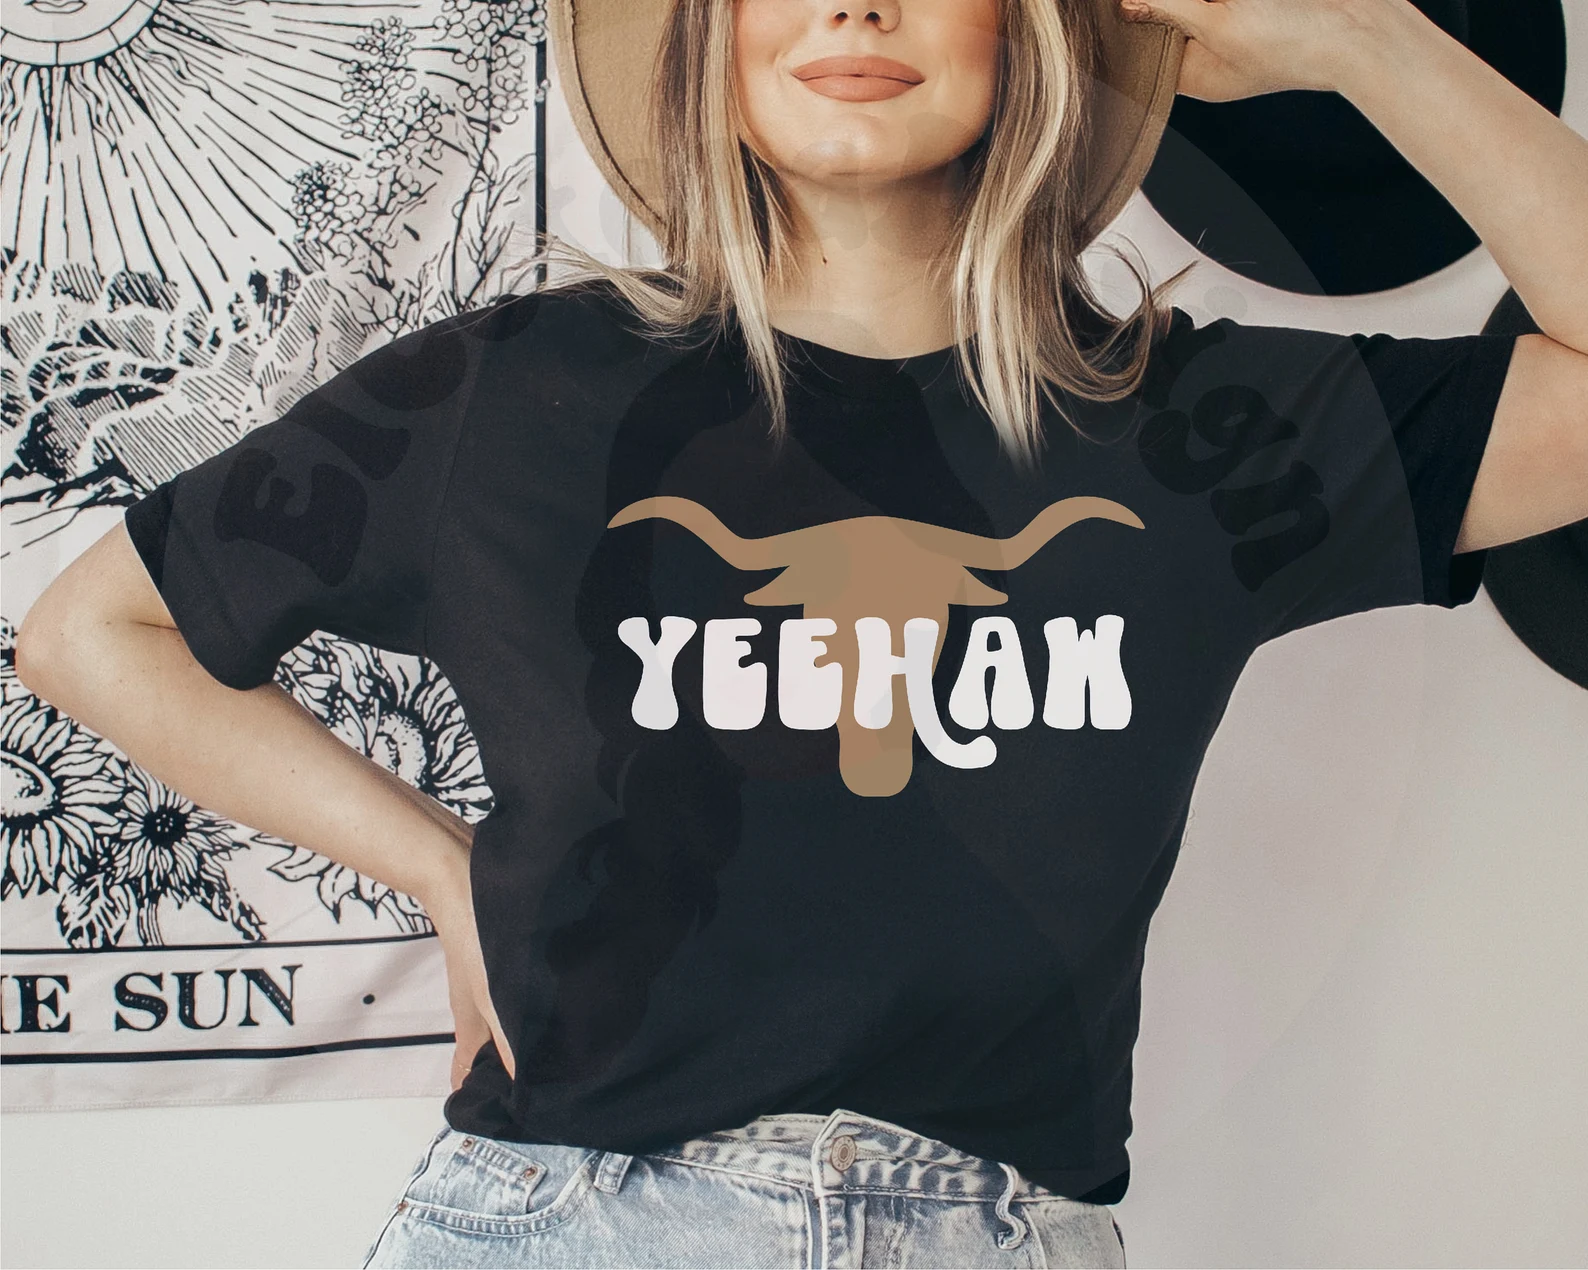 Classic black t-shirt with a gold cow and bold font.